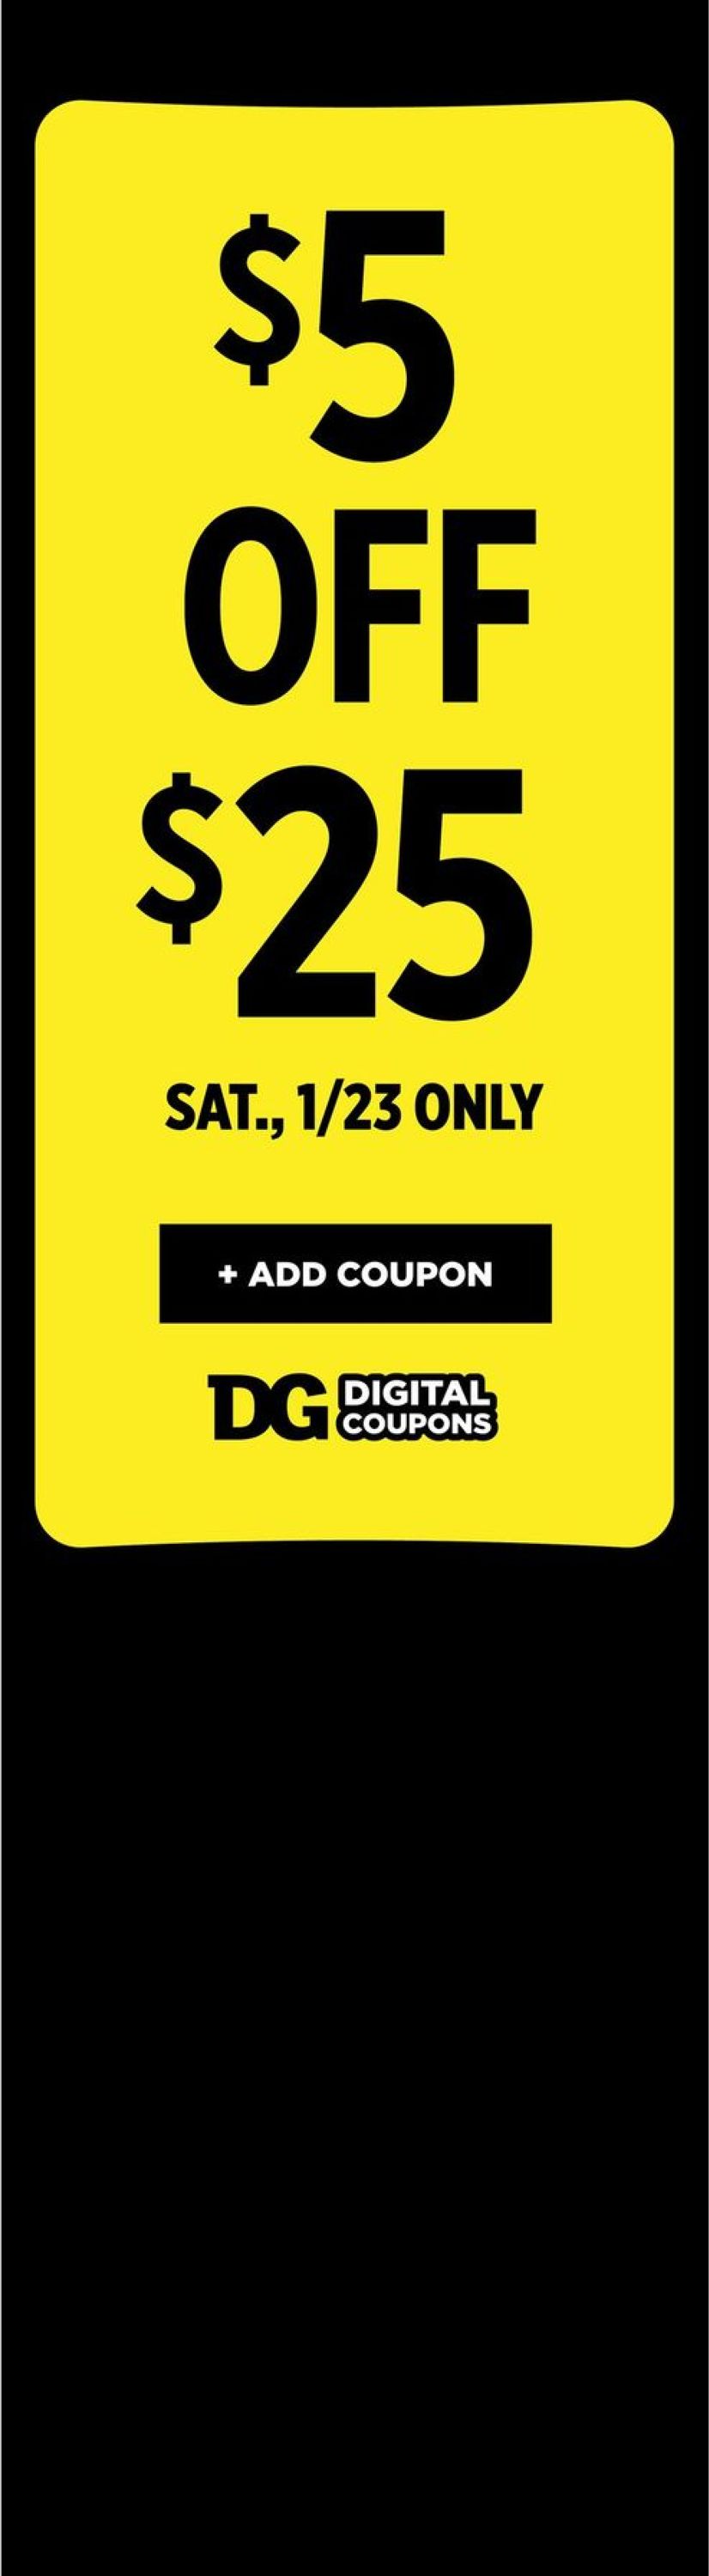 Dollar General Ad from 01/17/2021